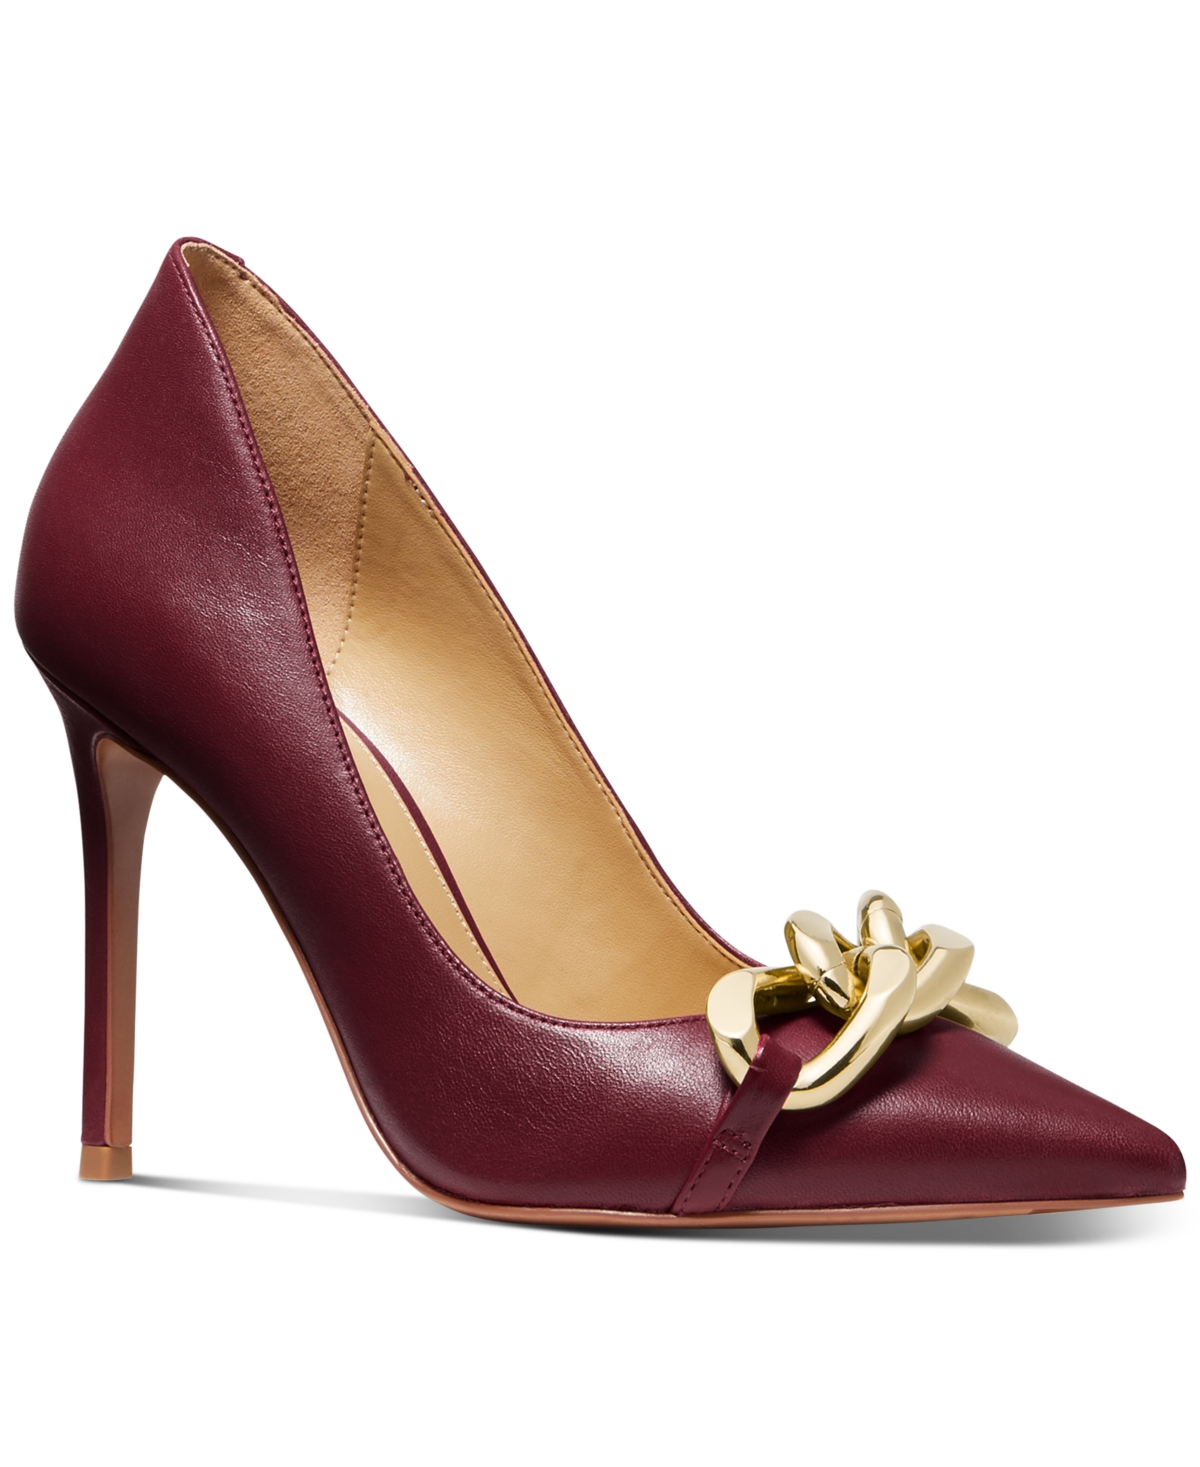 UPC 195512620904 product image for Michael Michael Kors Women's Scarlett Pointed-Toe Chain Pumps Women's Shoes | upcitemdb.com